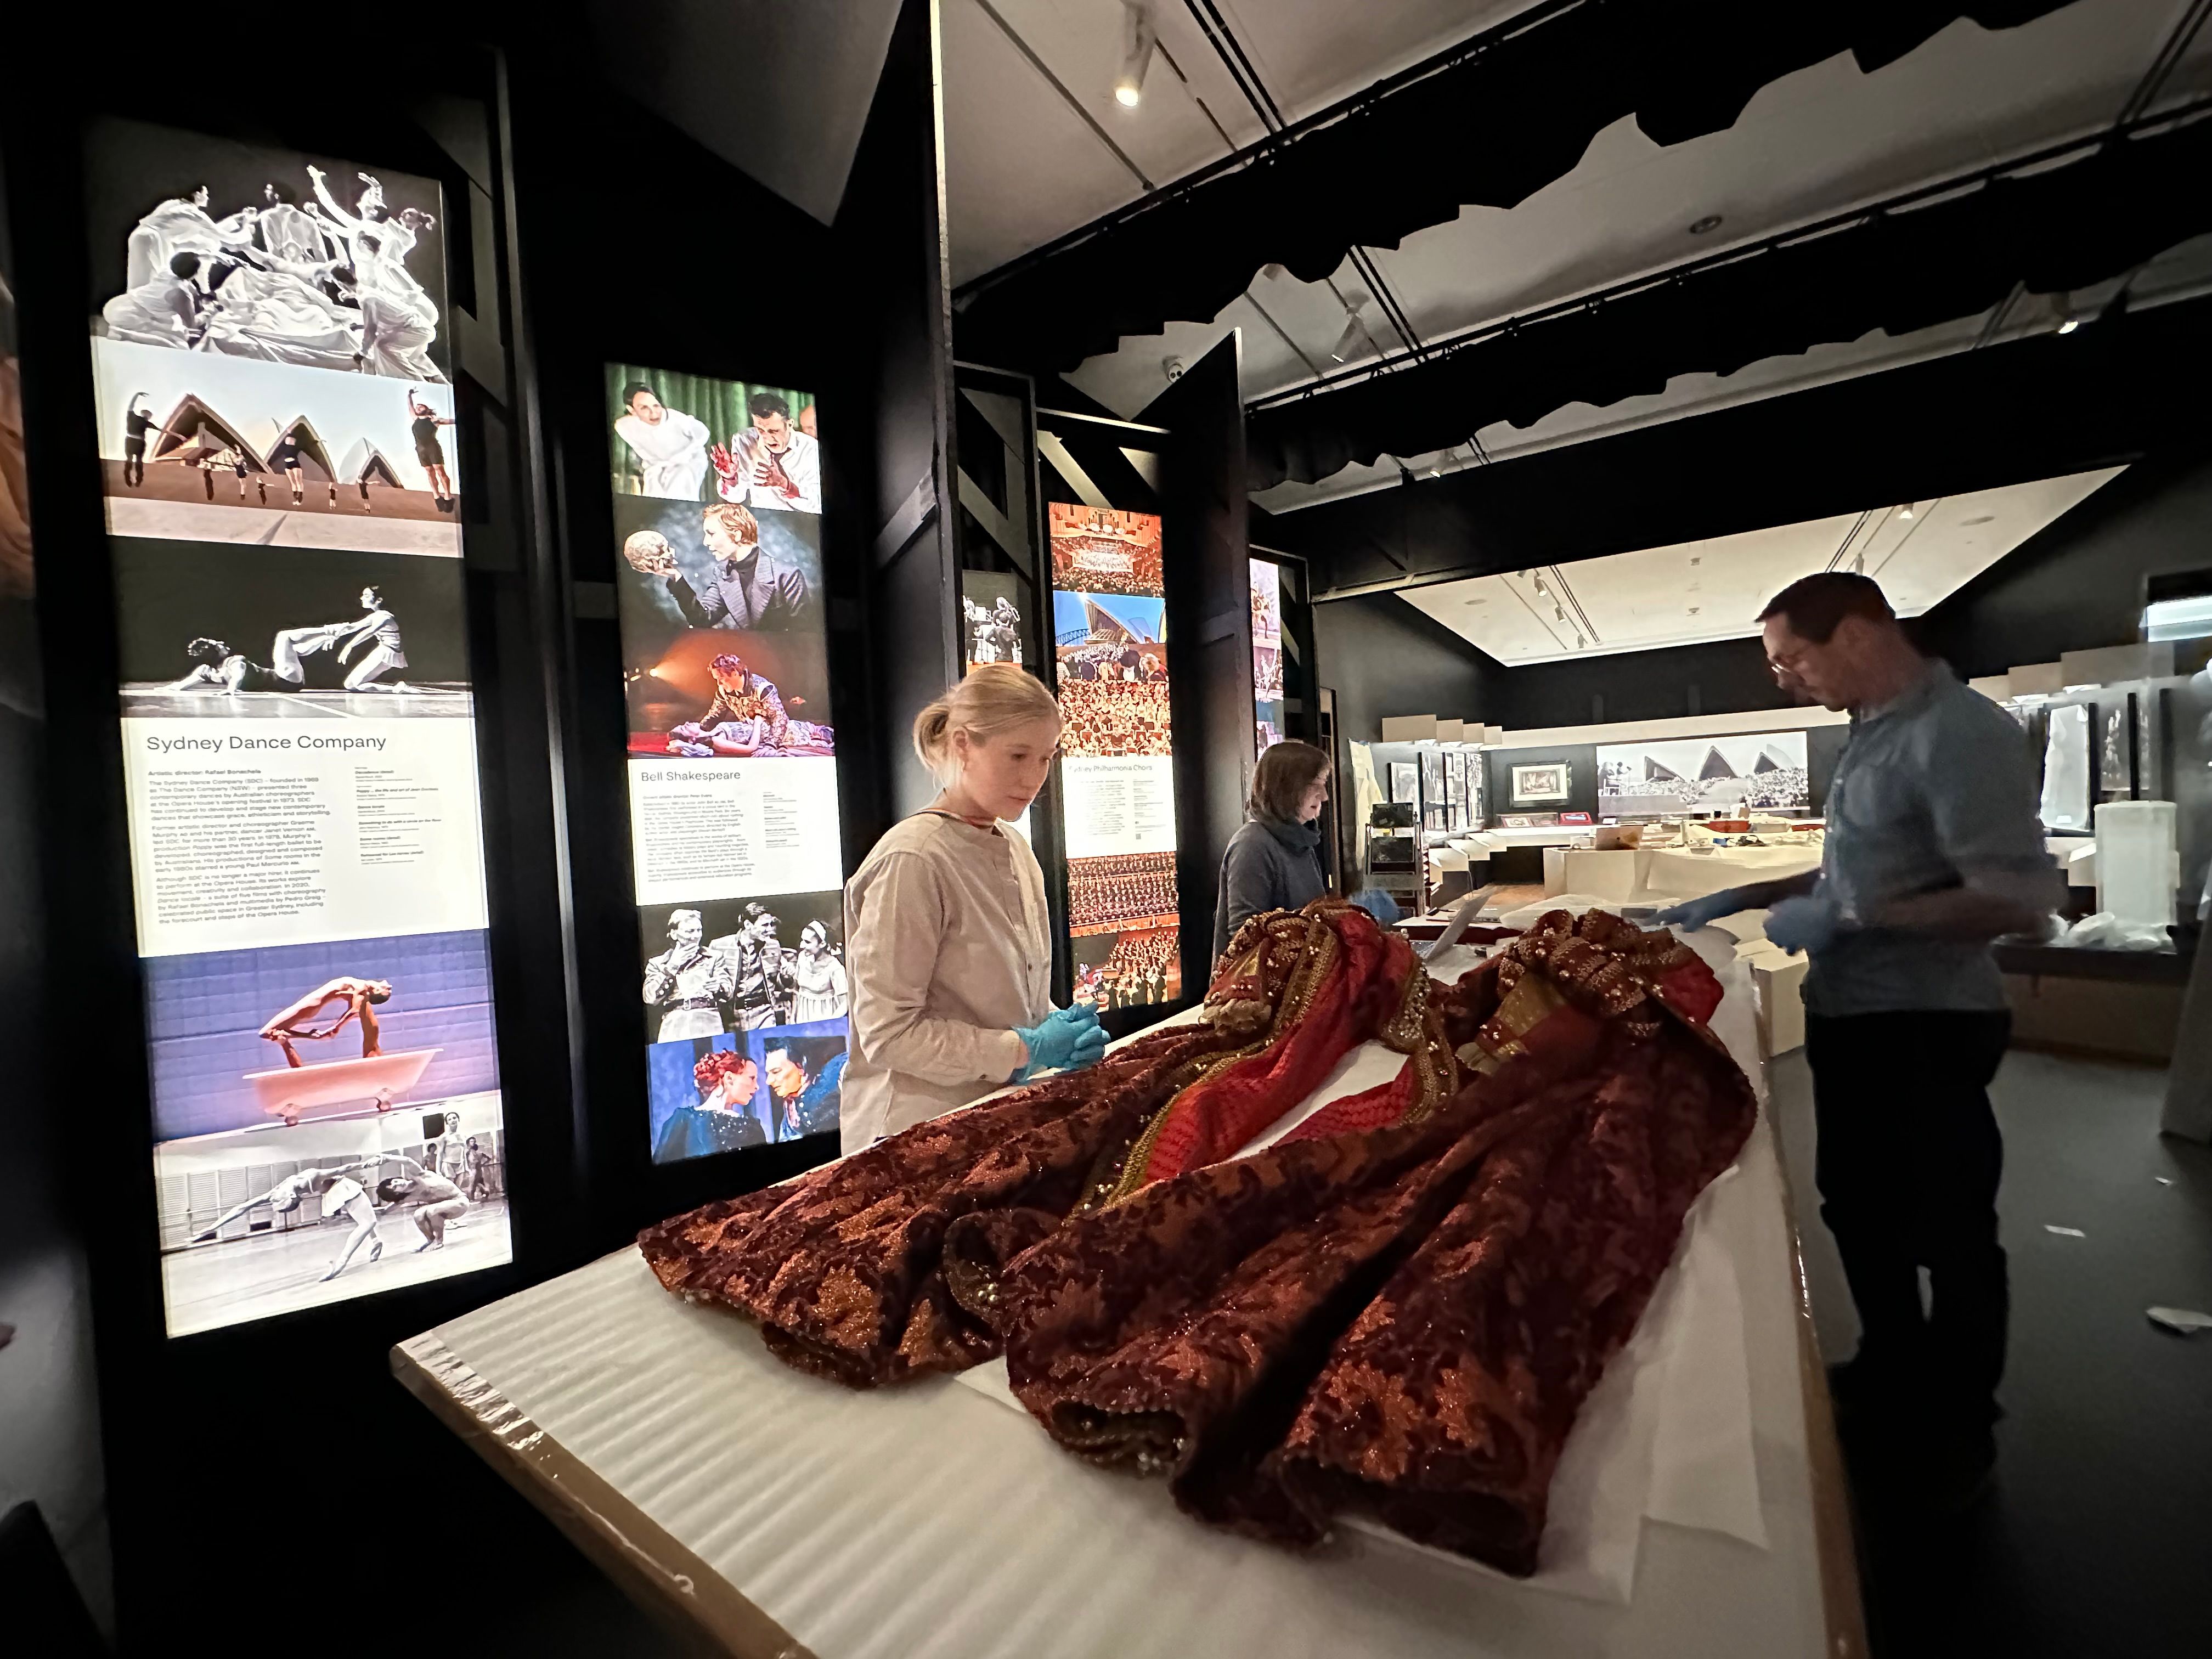 A large, elaborately decorated red dress is stretched out on a large table within an exhibition space, being examined by three people.